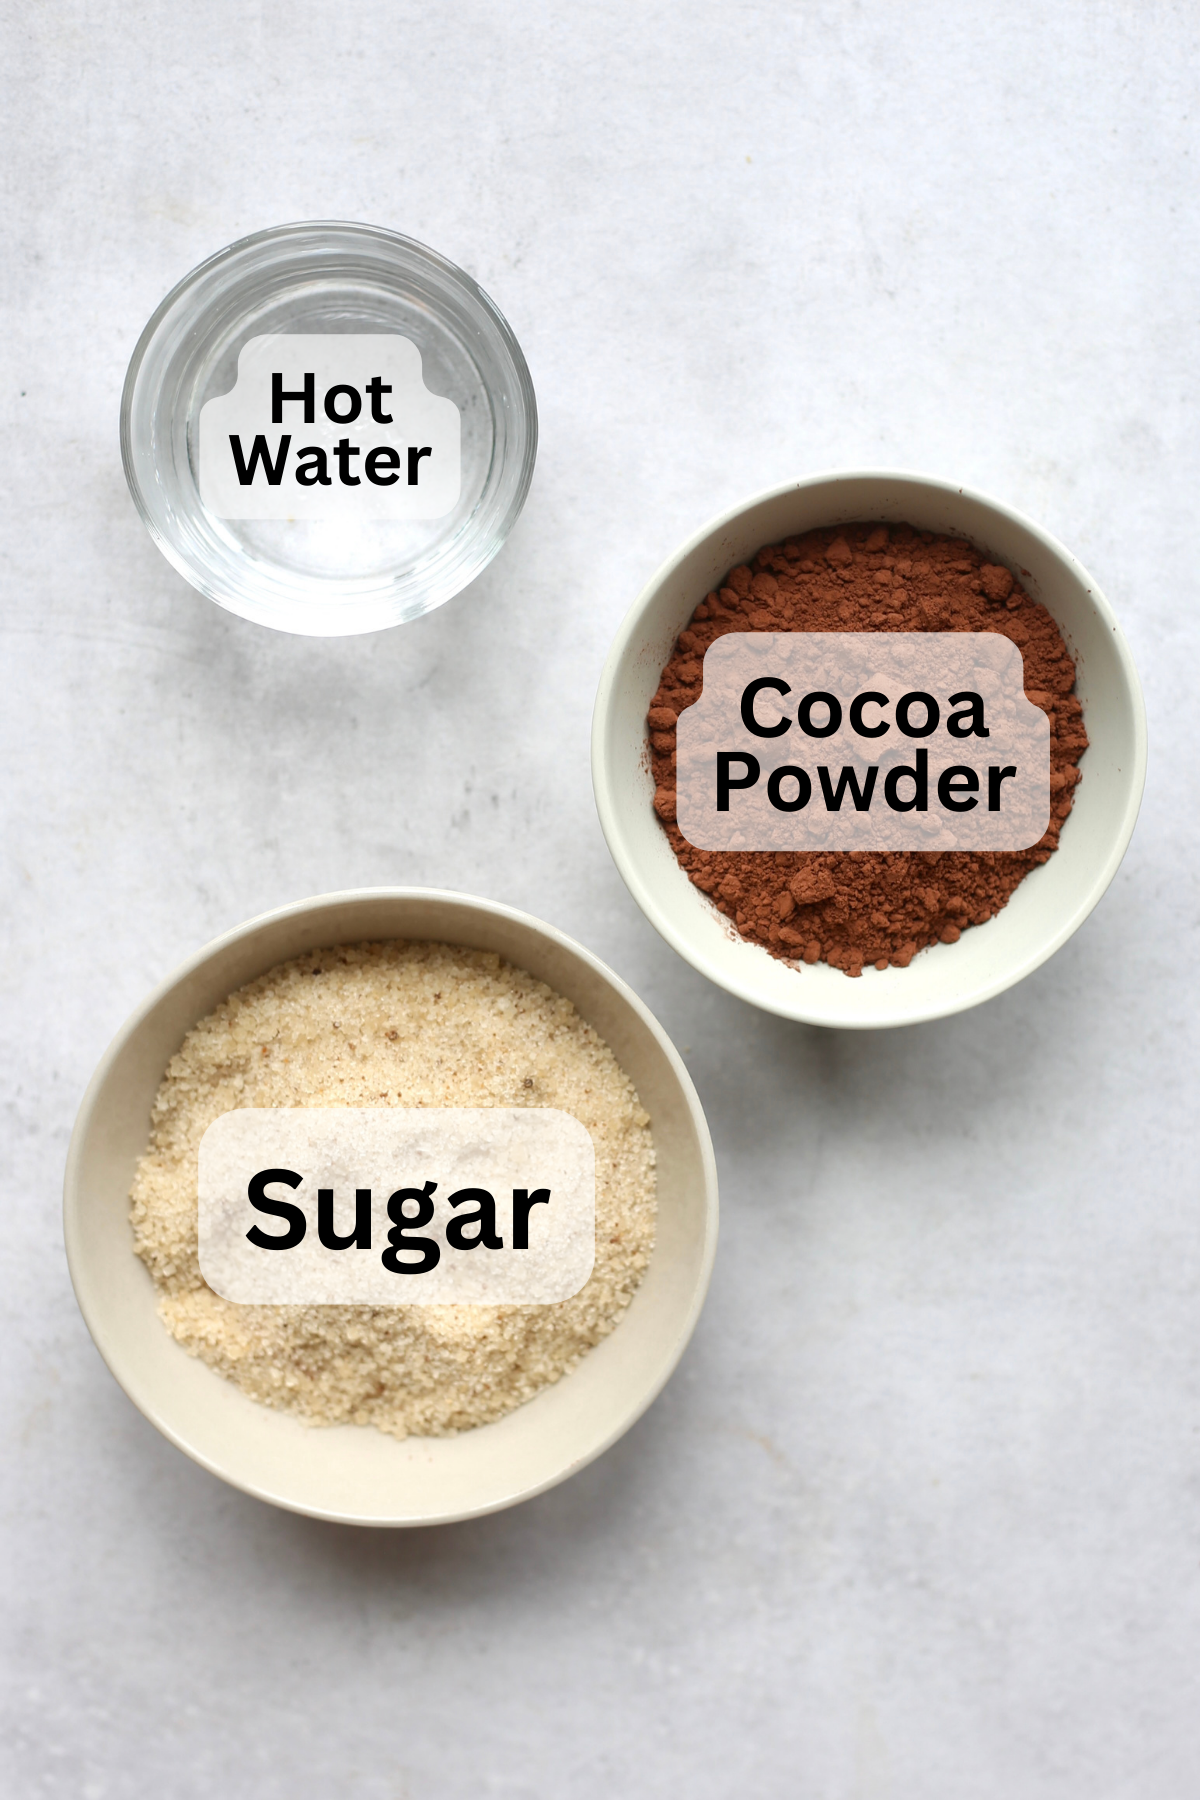 Water, cocoa powder and sugar measured out into bowls with labels over them.